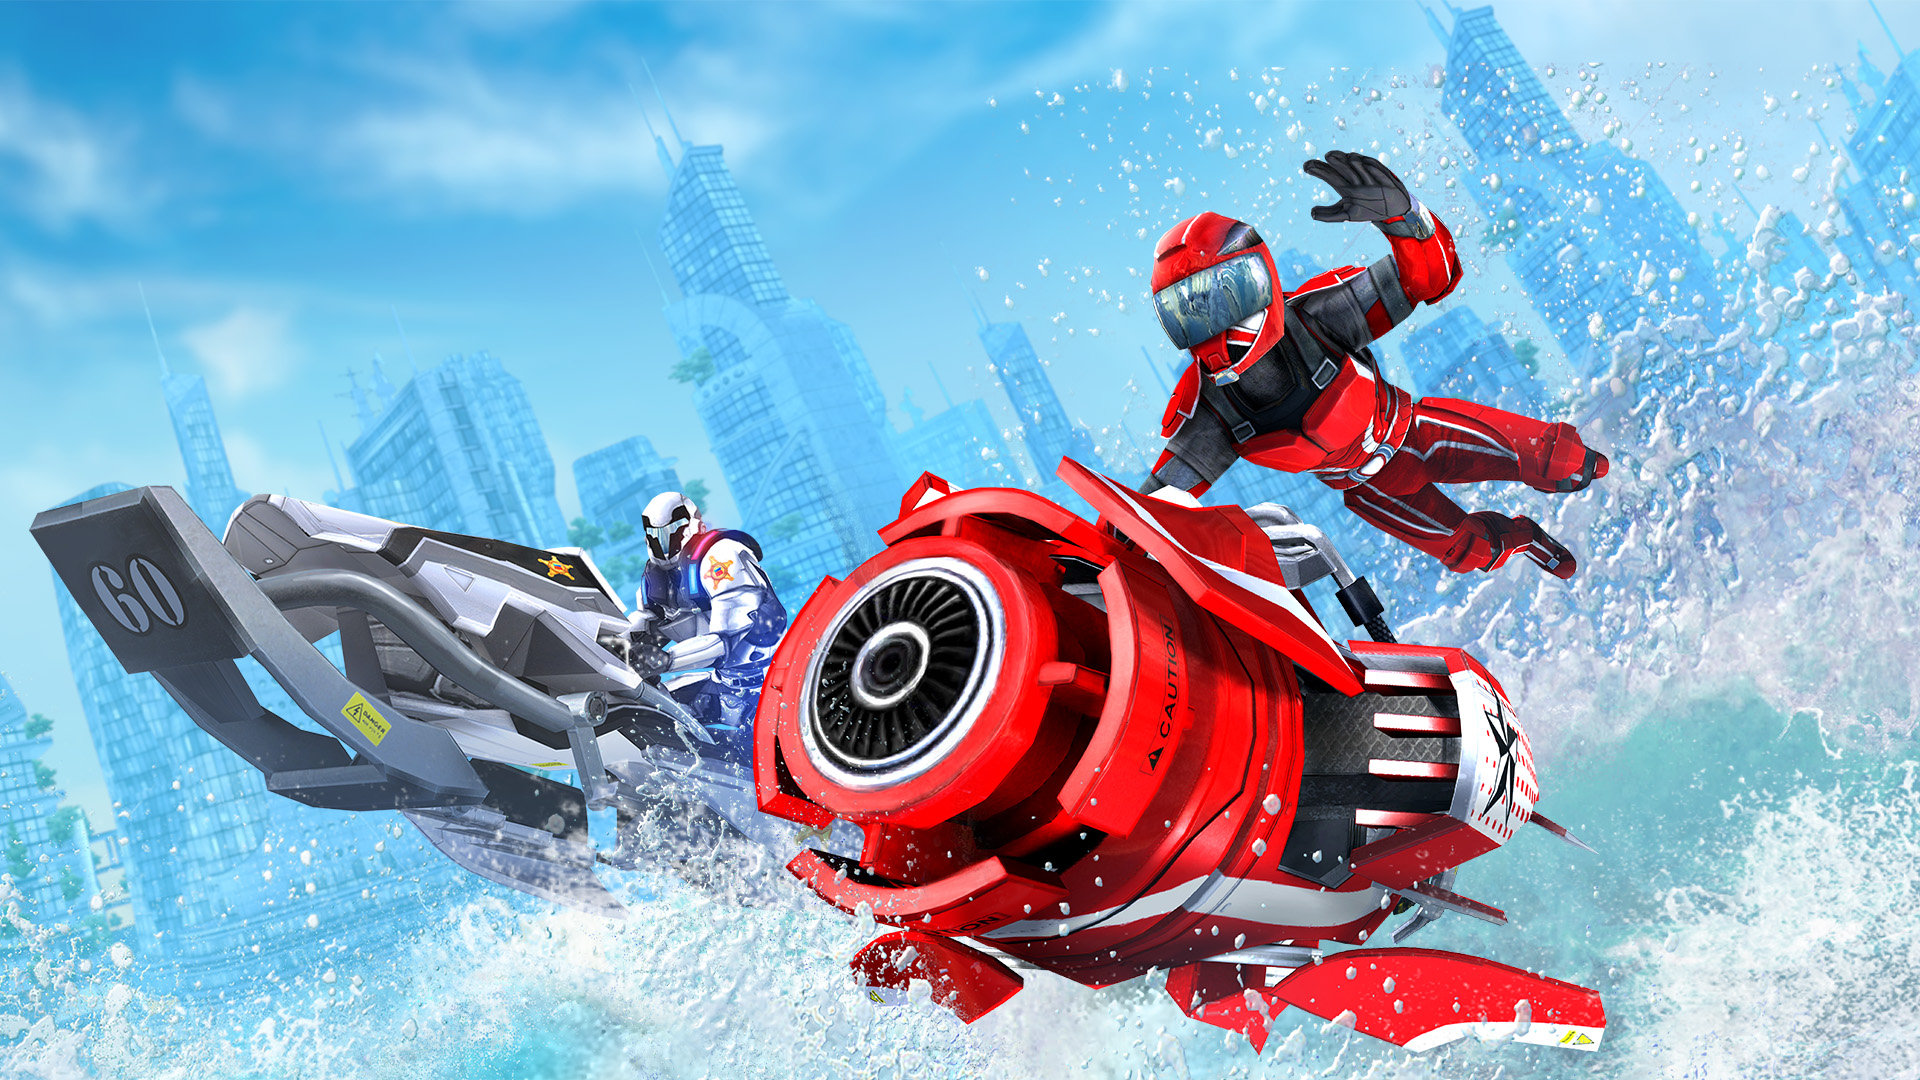 Riptide Gp: Renegade Is Available Now On Windows 10 And Xbox One | Windows  Experience Blog